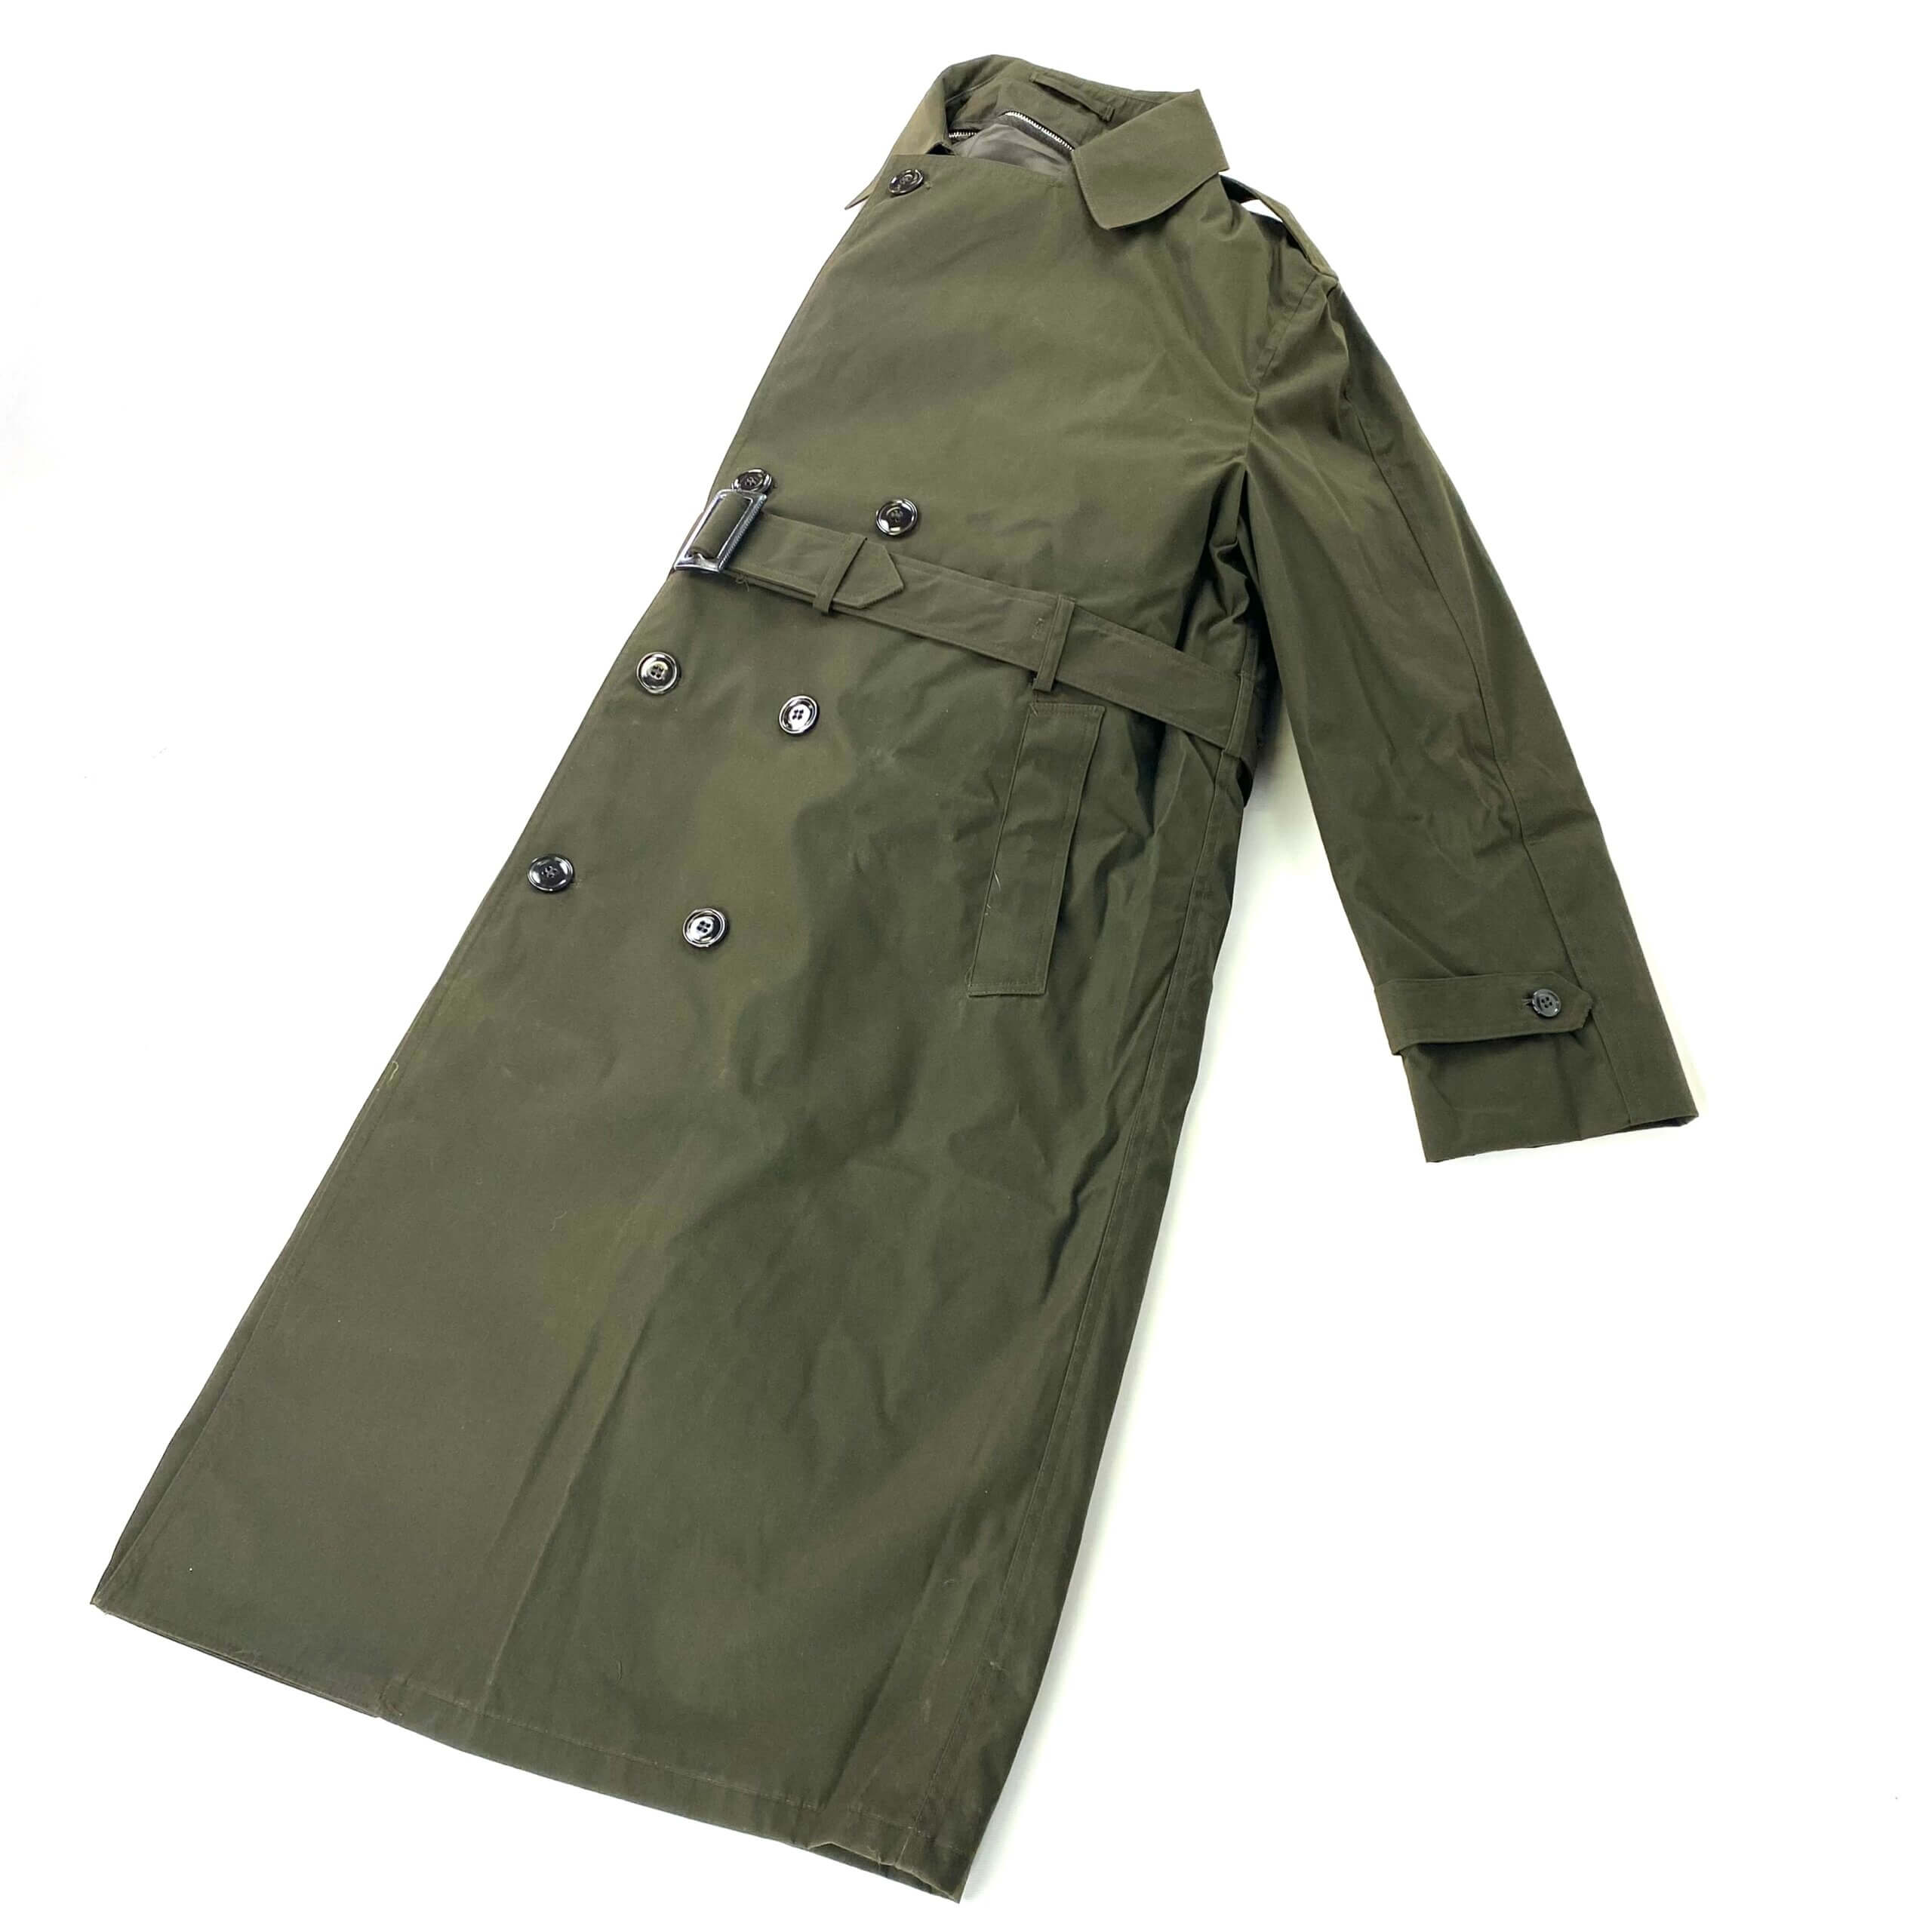 US Army AGSU All Weather Coat, Army Green - Venture Surplus